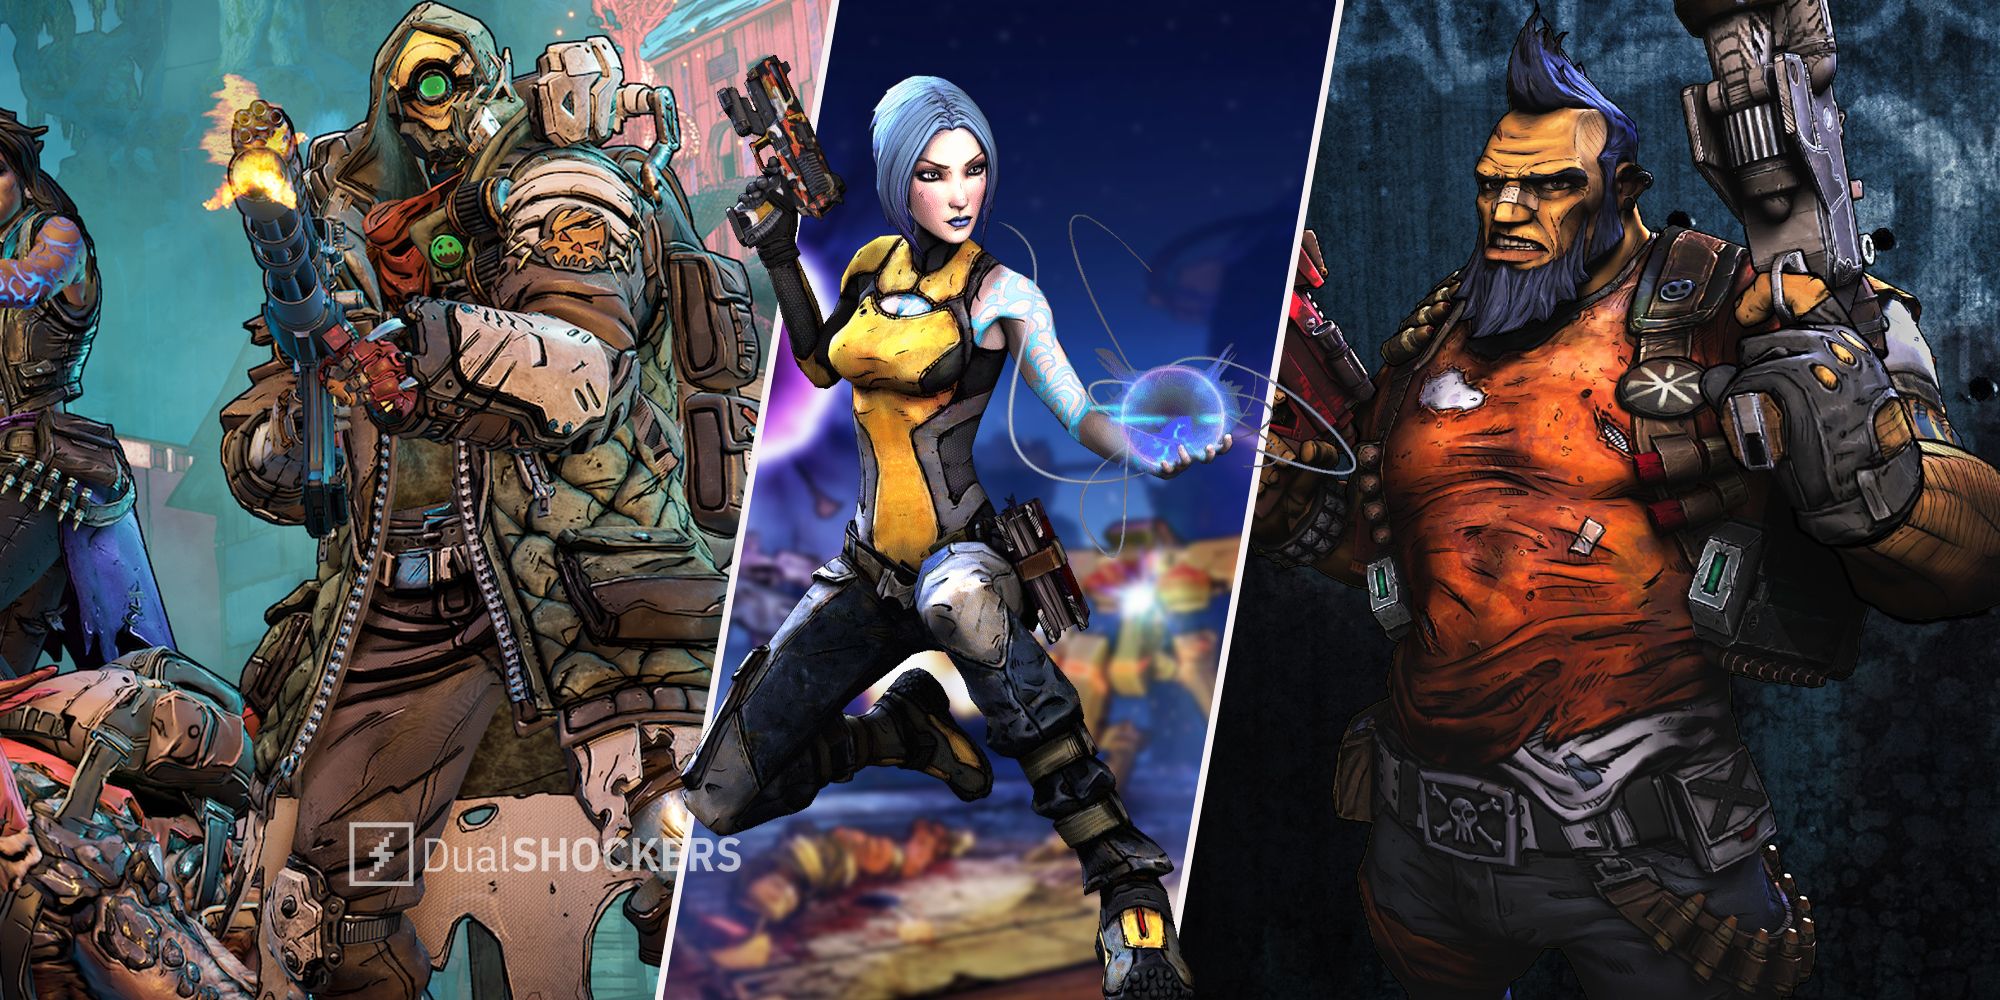 Flak from Borderlands 3 on left, Maya from Borderlands 2 in middle, Salvador from Borderlands 2 on right